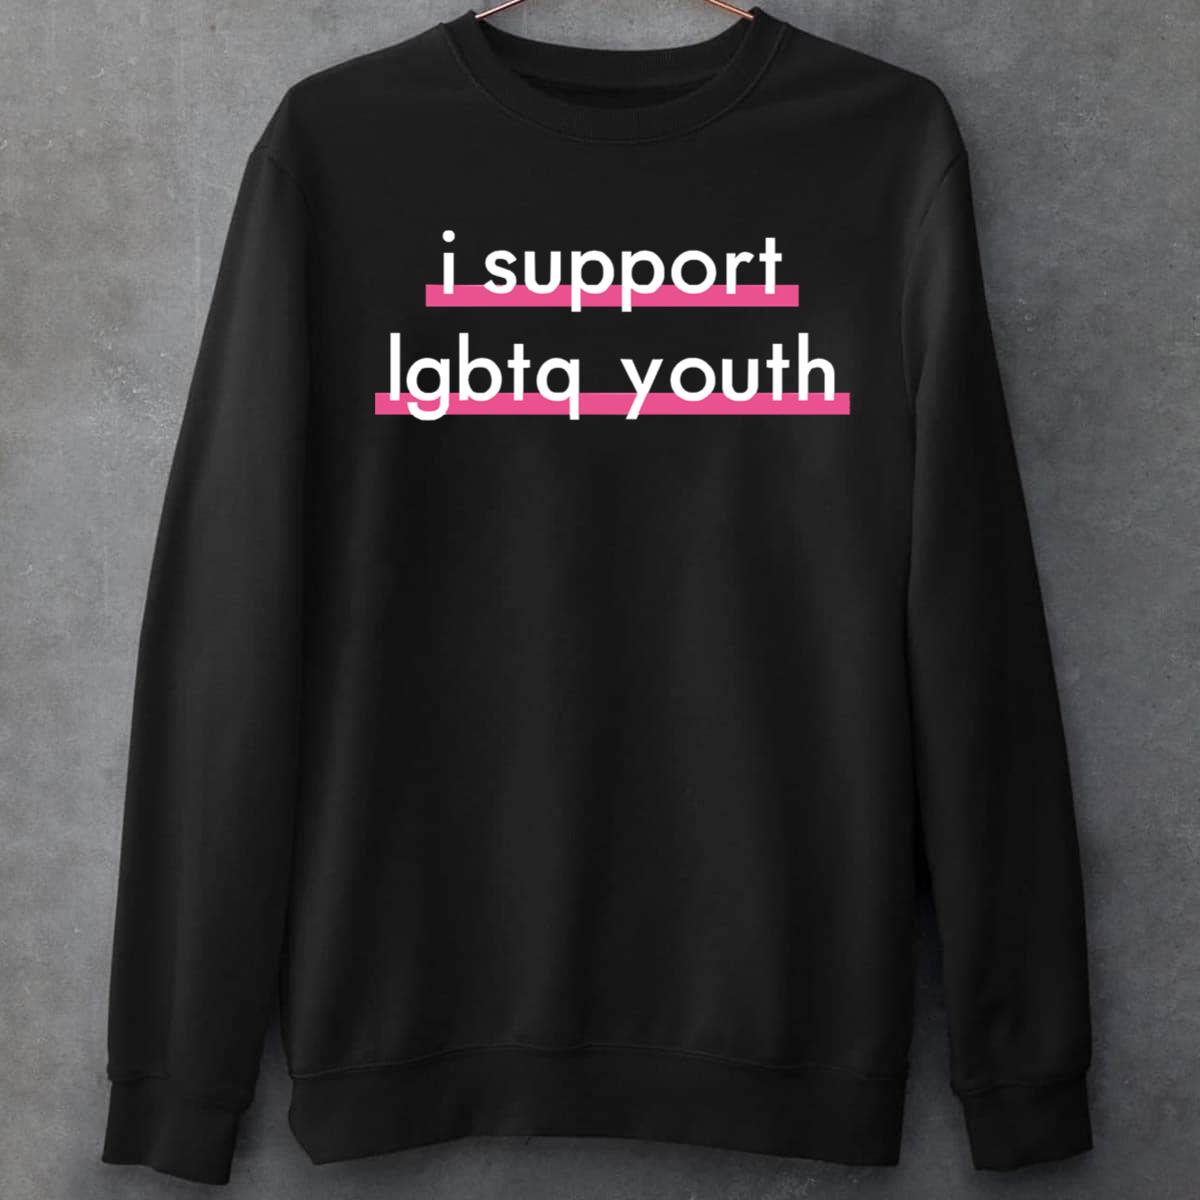 I Support LGBTQ Youth Quote Unisex T-Shirt